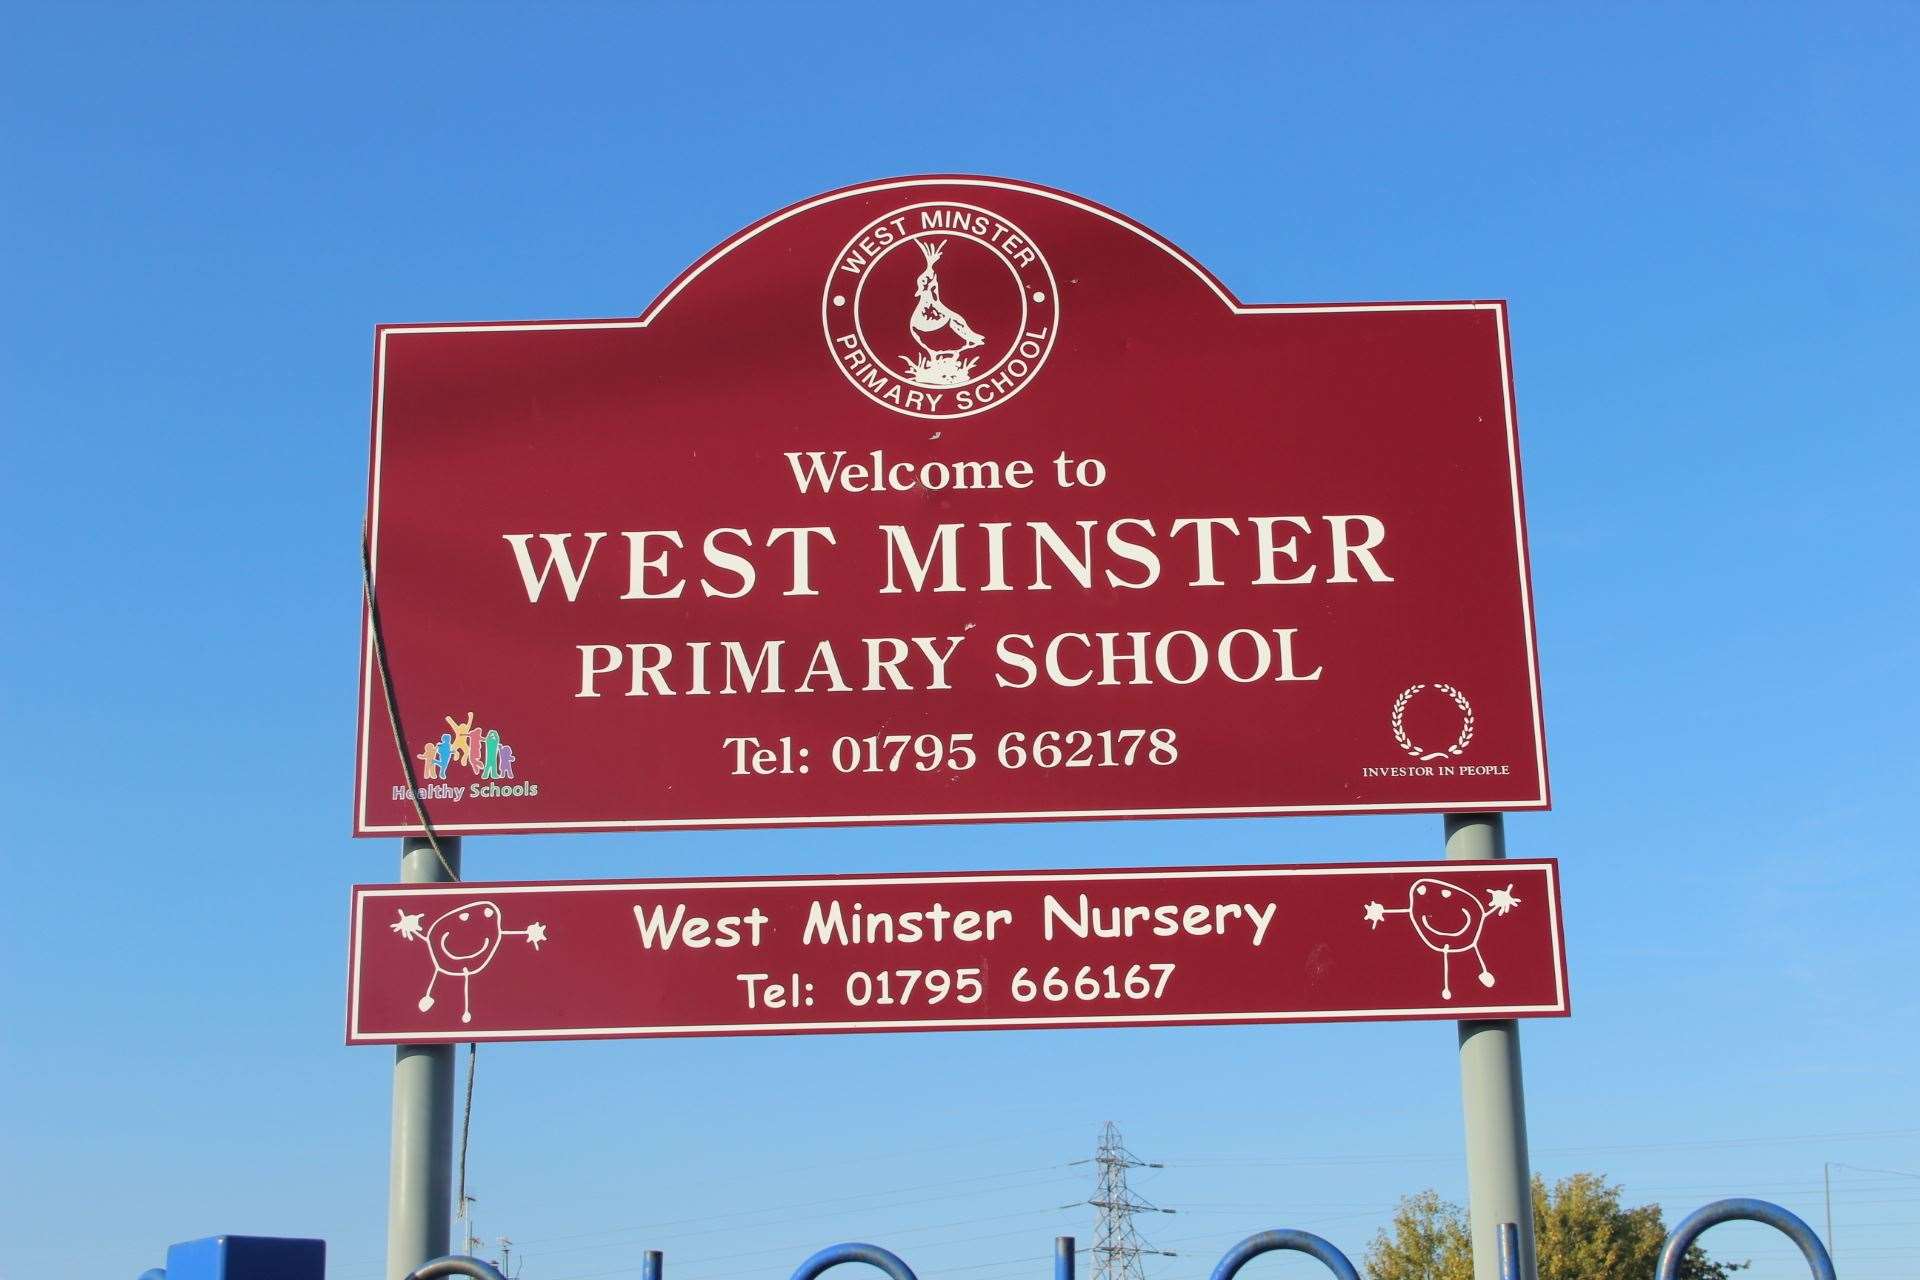 Harry was a pupil at West Minster Primary School nursery, in Sheerness